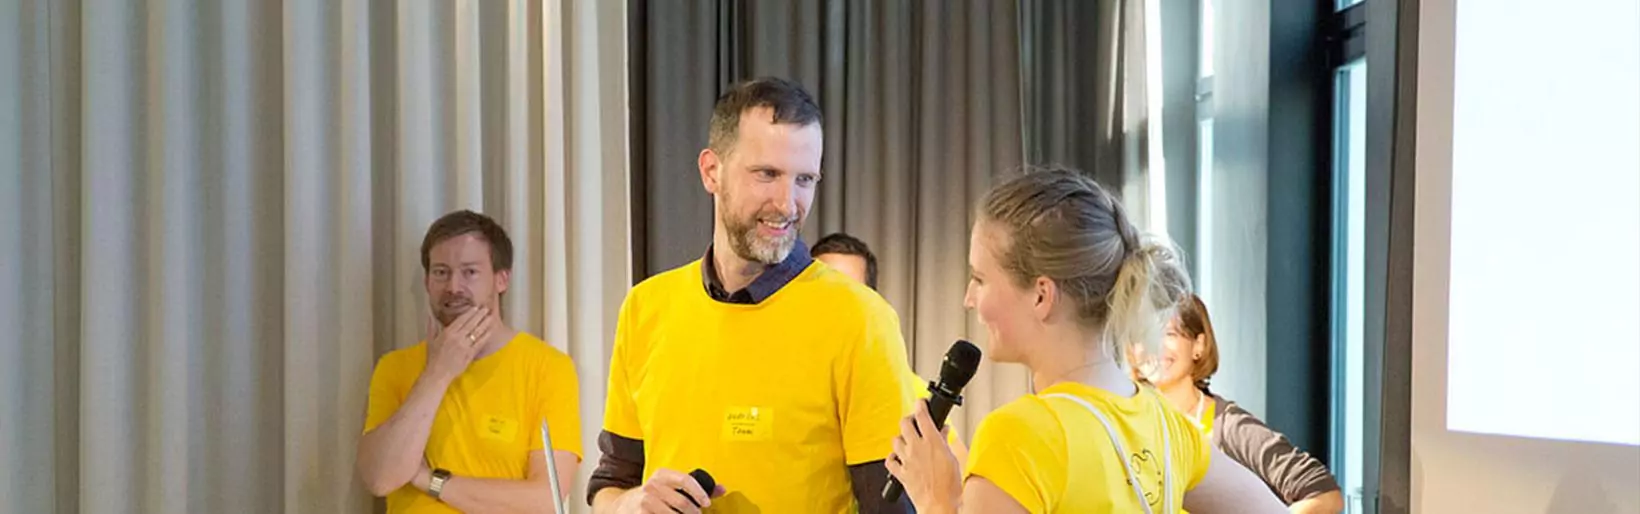 Medienwerft is the Gold-Sponsor of the UX CAMP 2016